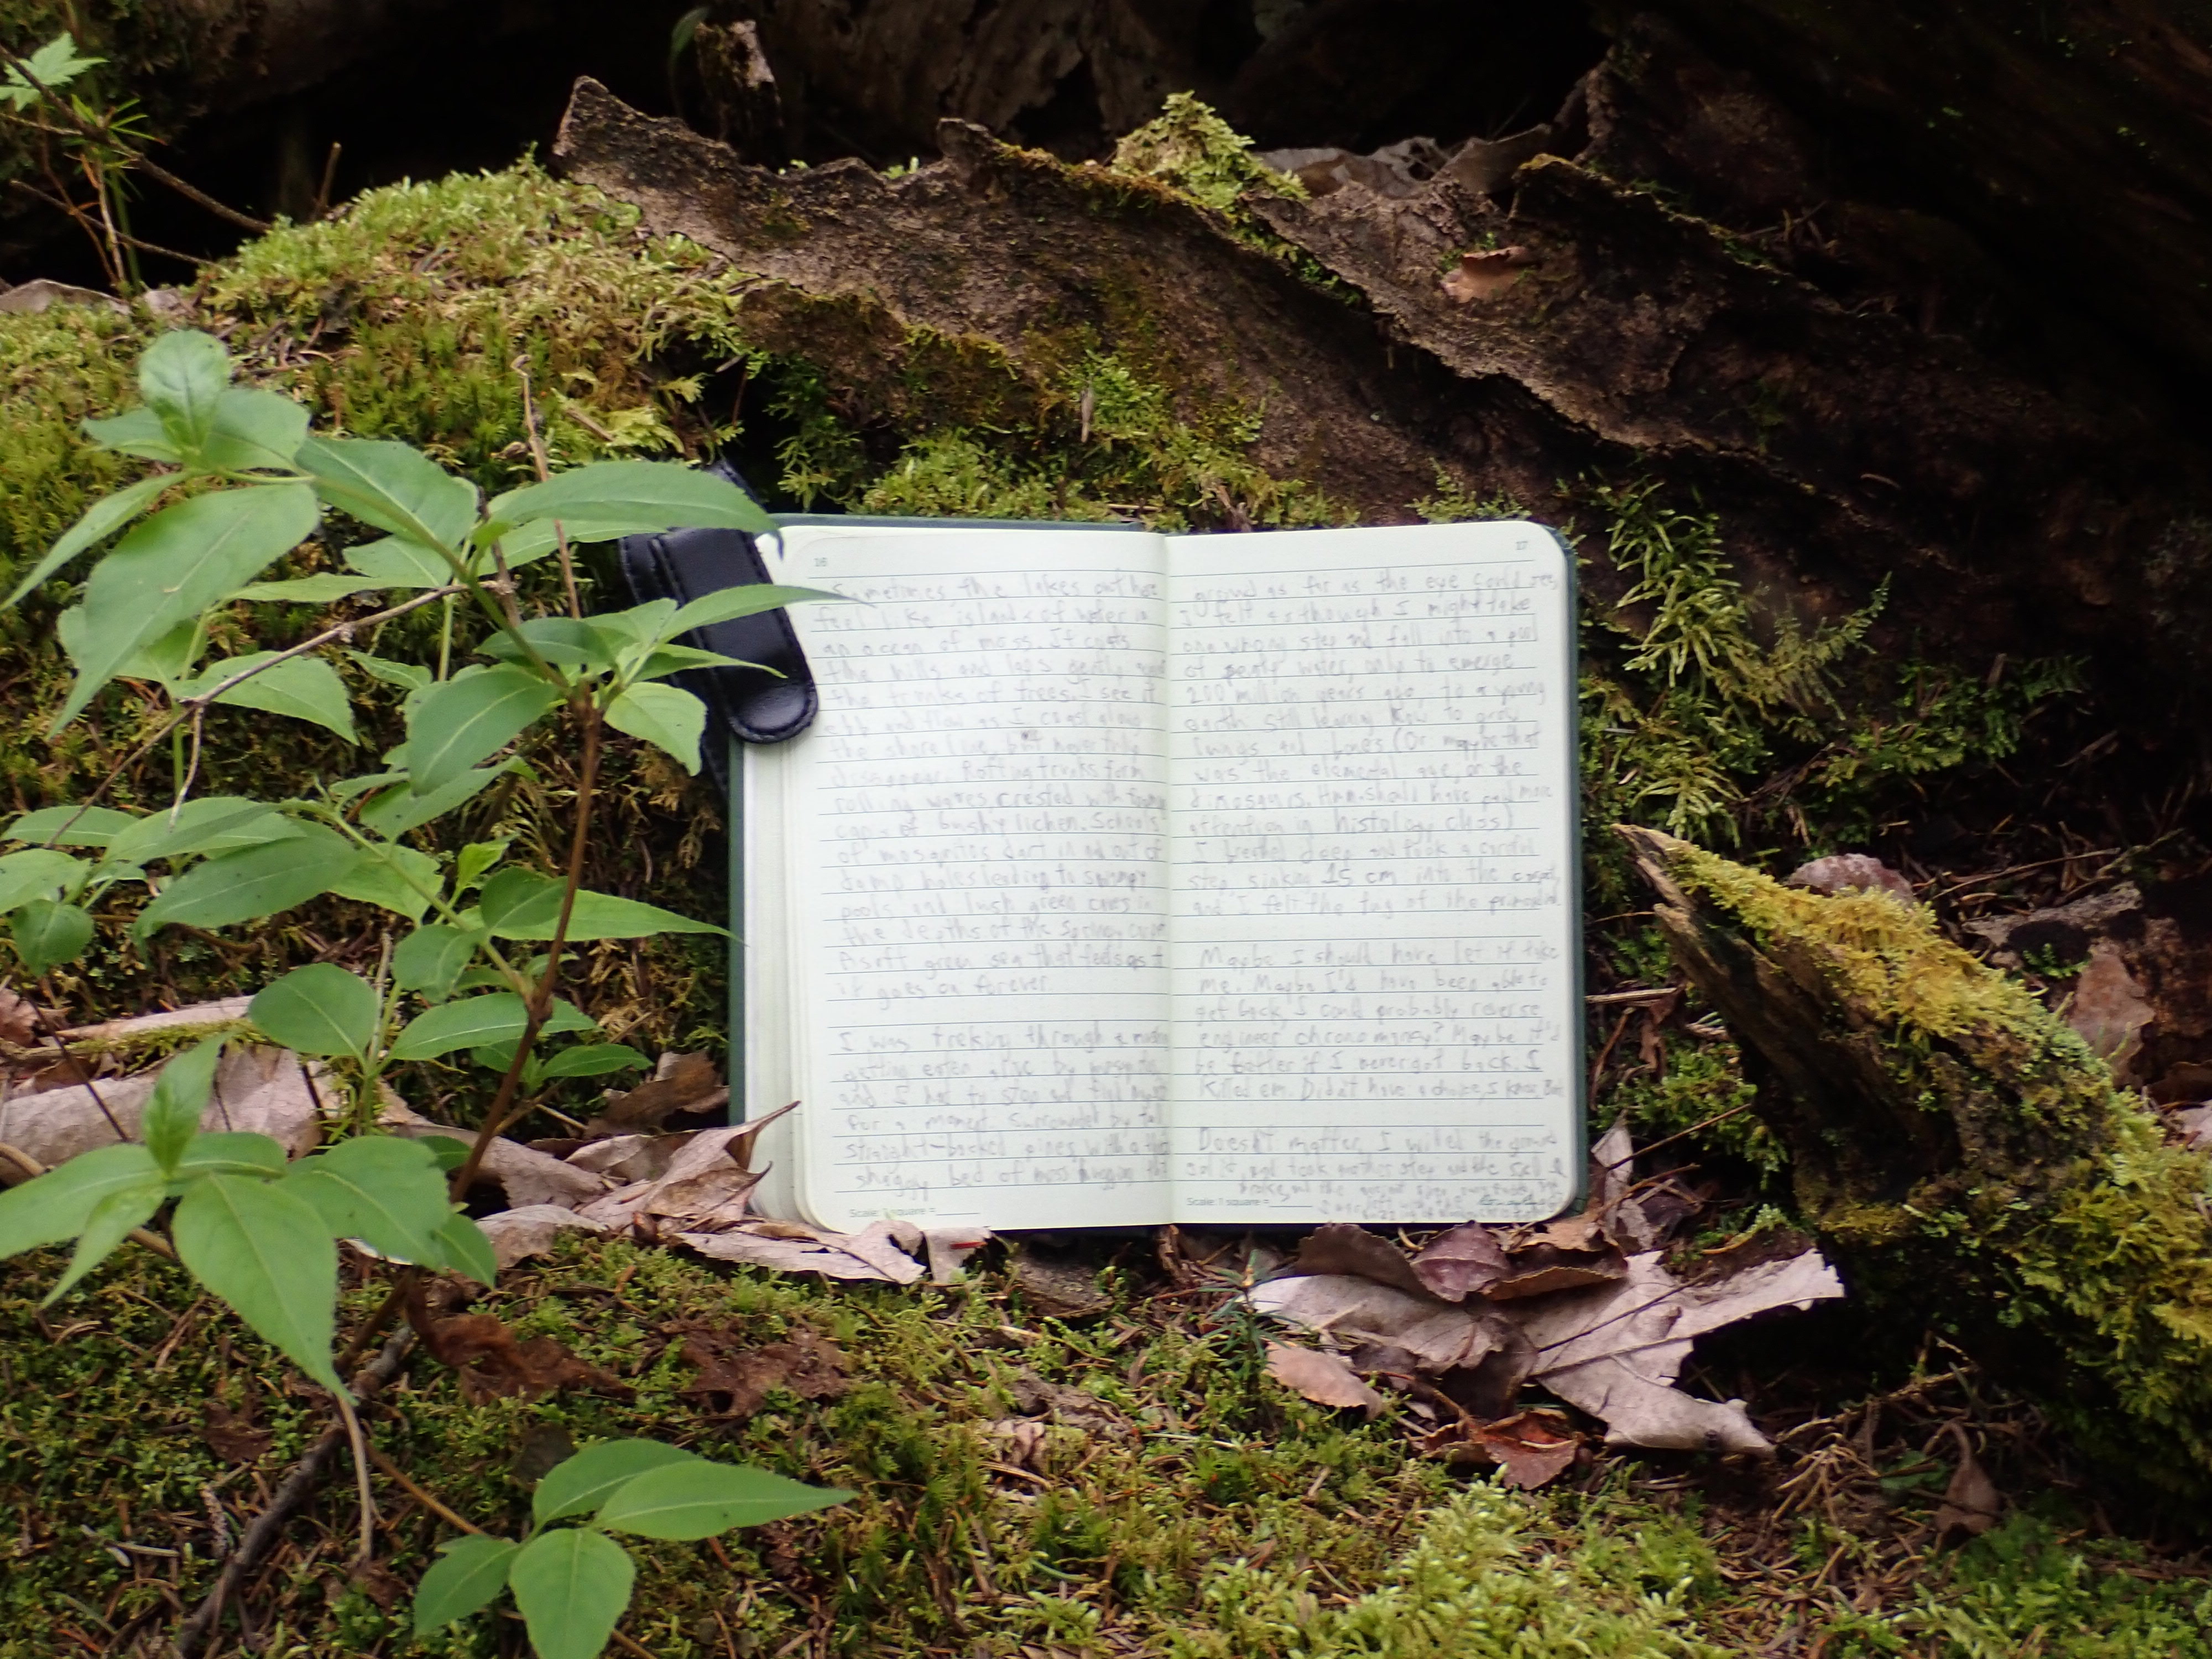 a picture of a notebook with a pocket knife case clipped to it resting on leaf litter and against moss covered log, behind a sapling. written in the notebook are the above contents.